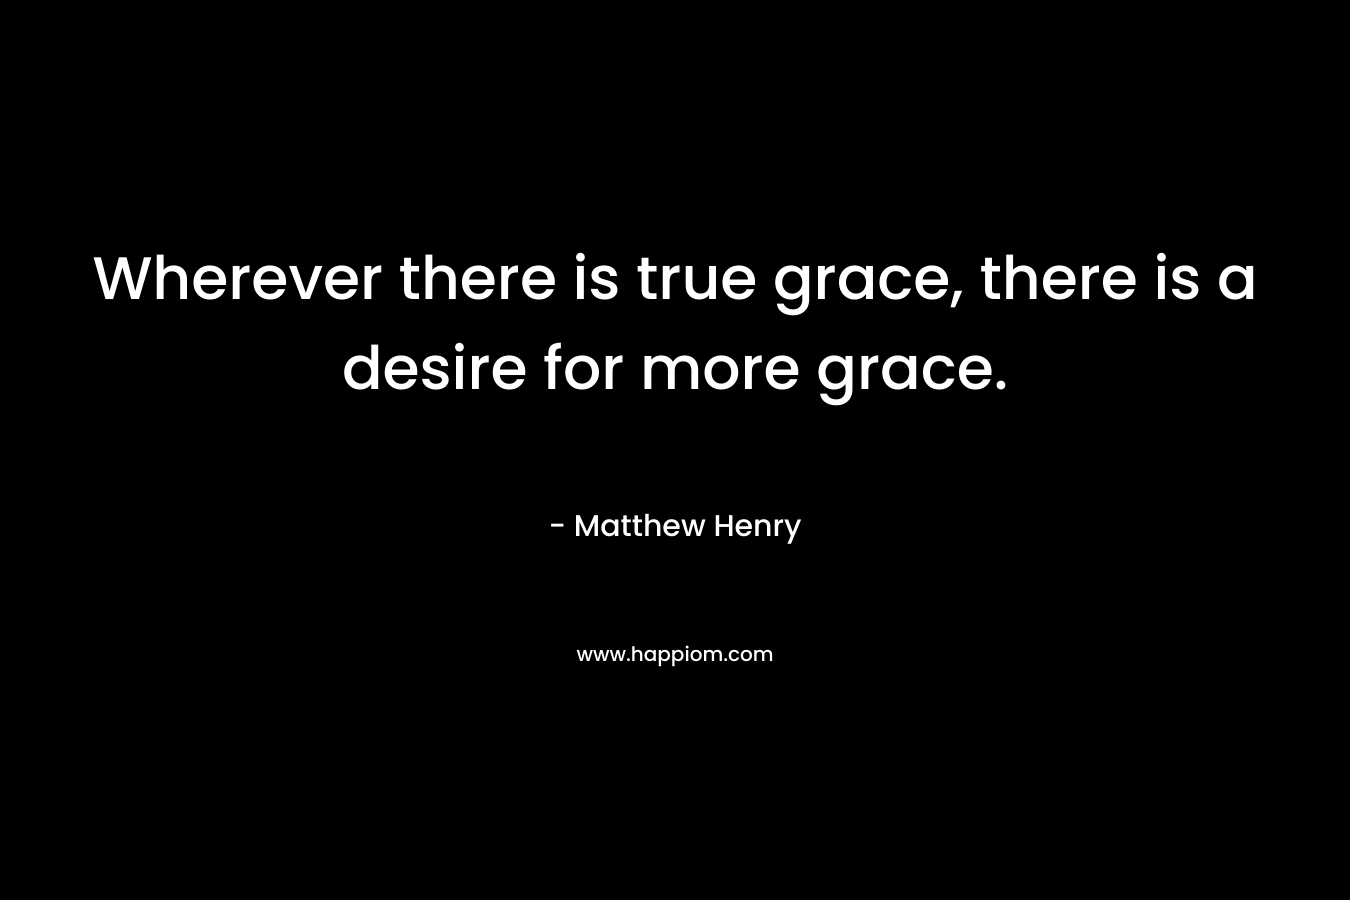 Wherever there is true grace, there is a desire for more grace.